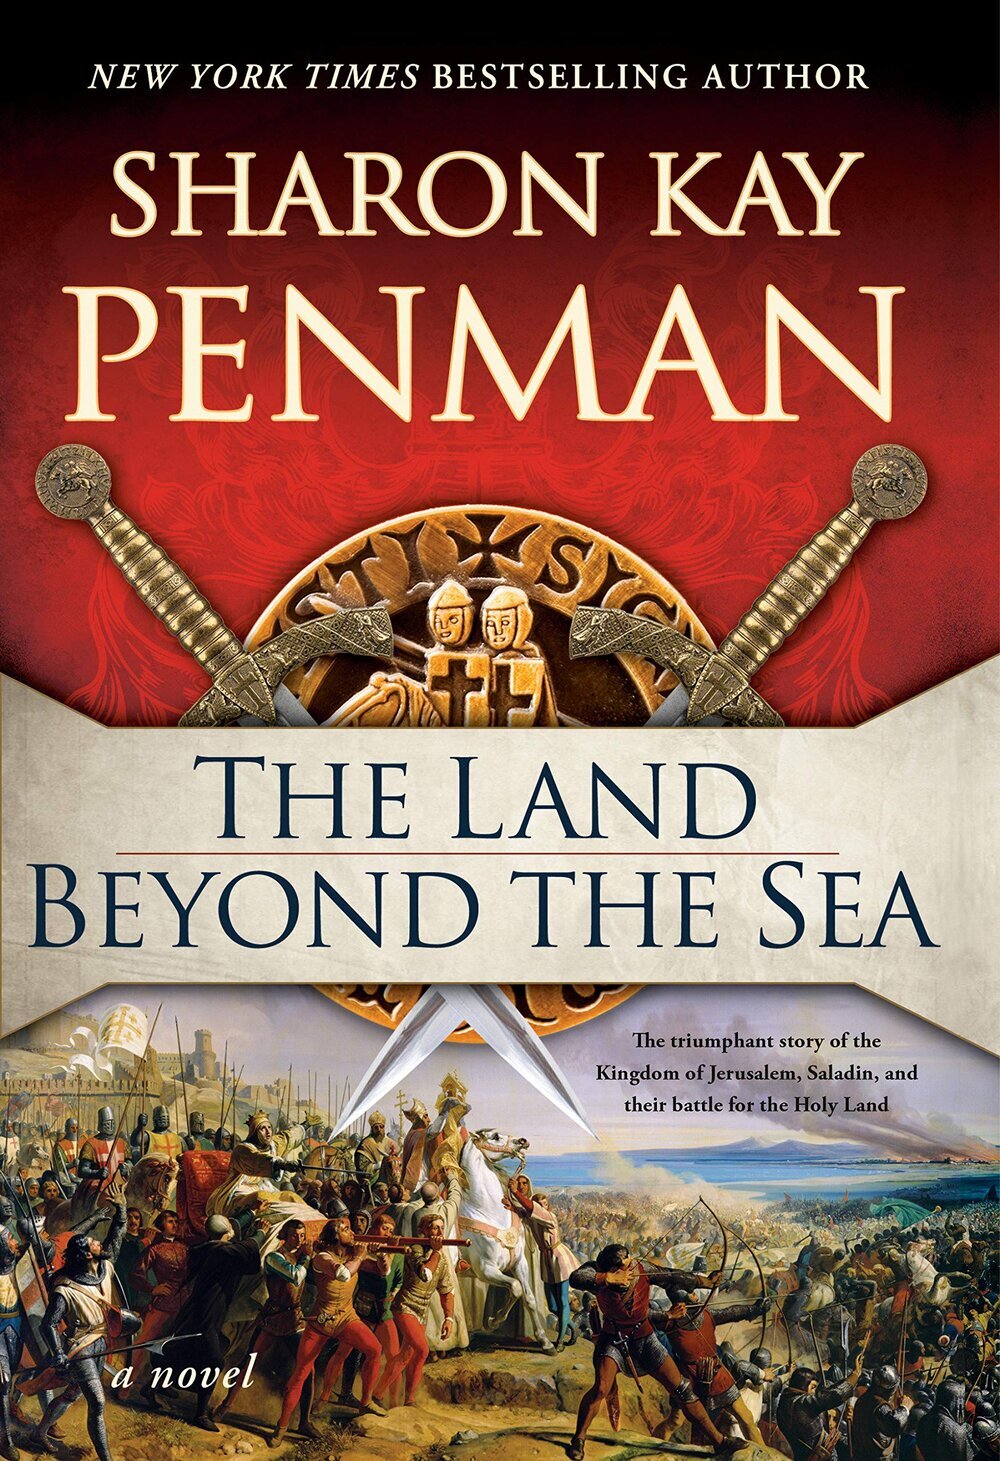 Best of Historical Fiction The Land Beyond the Sea by Sharon Kay Penman.jpg